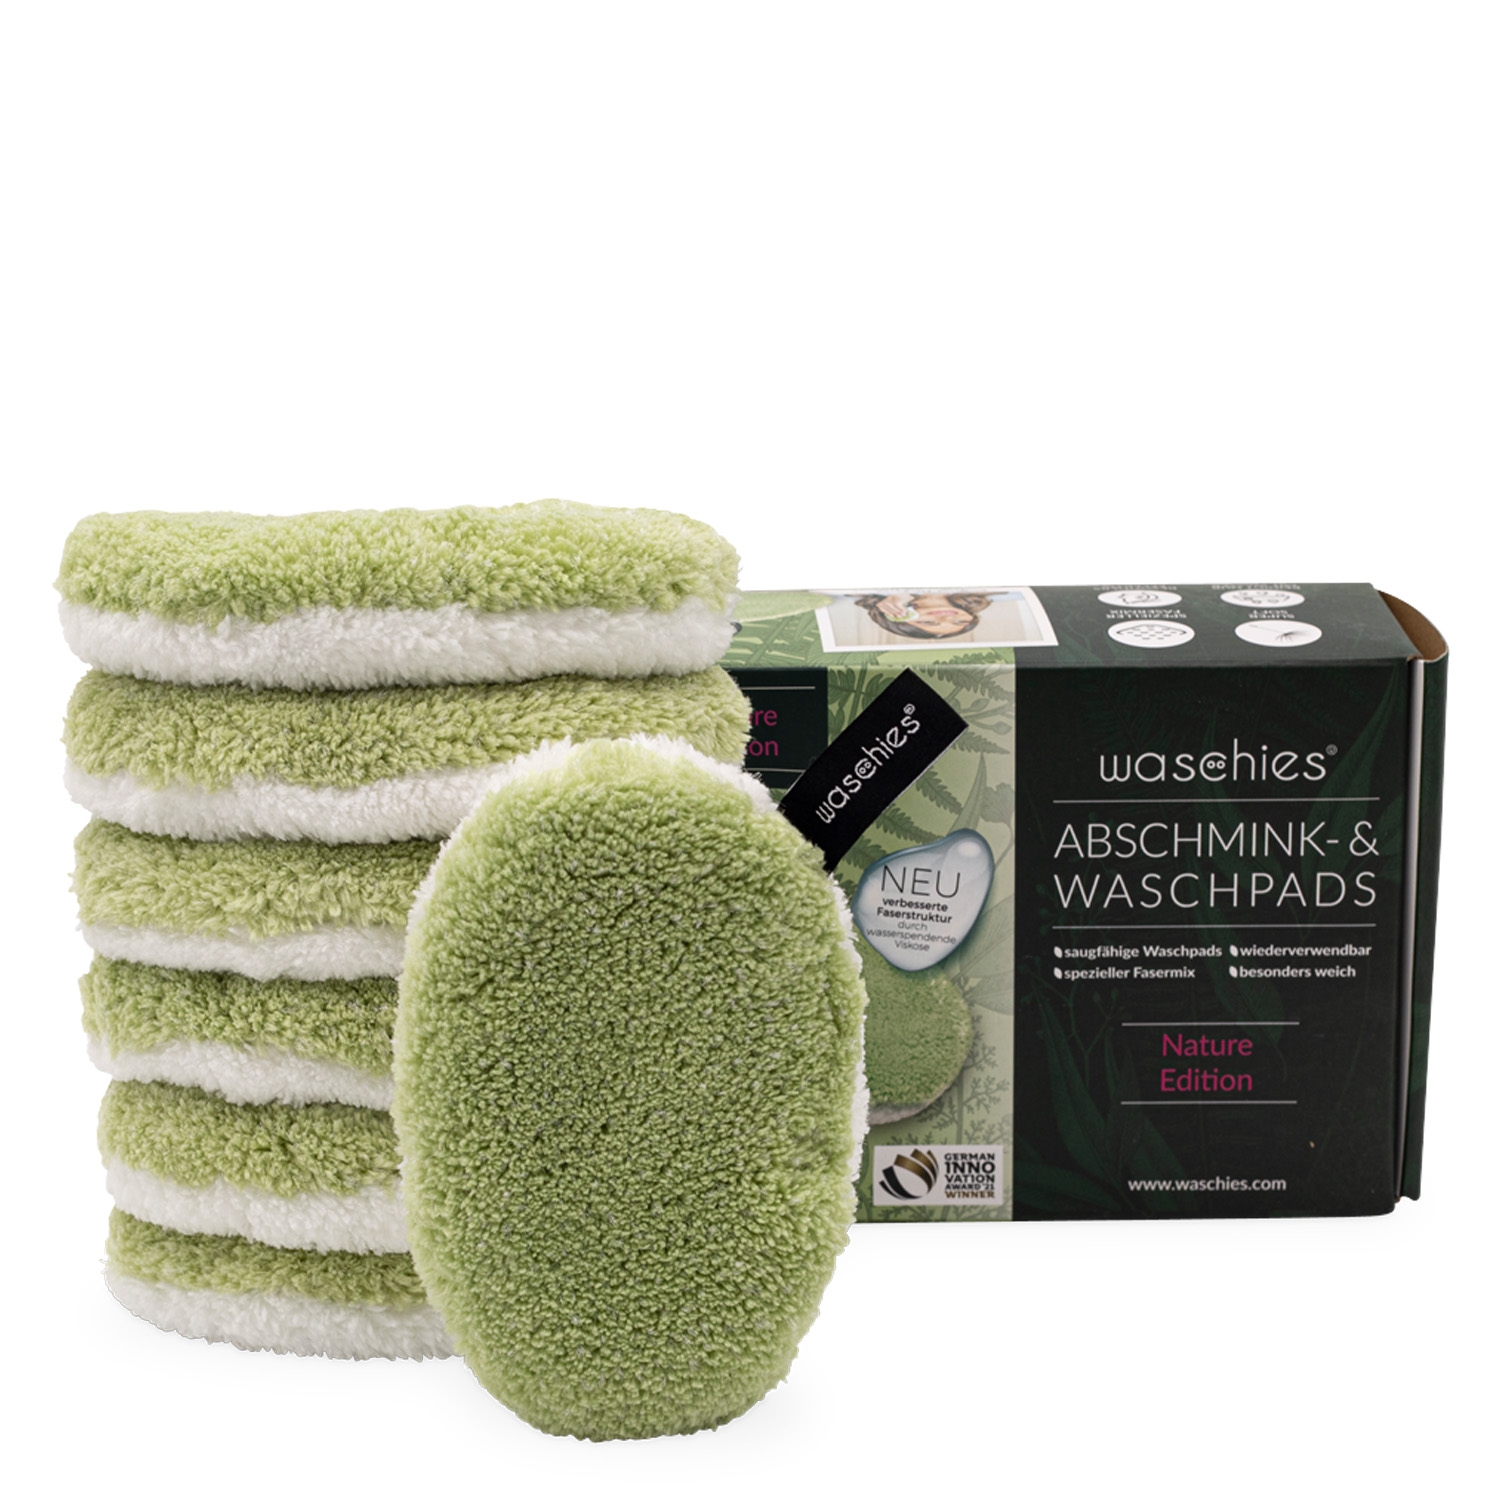 Product image from Waschies Faceline - Abschminkpads & Waschpads Nature-Edition